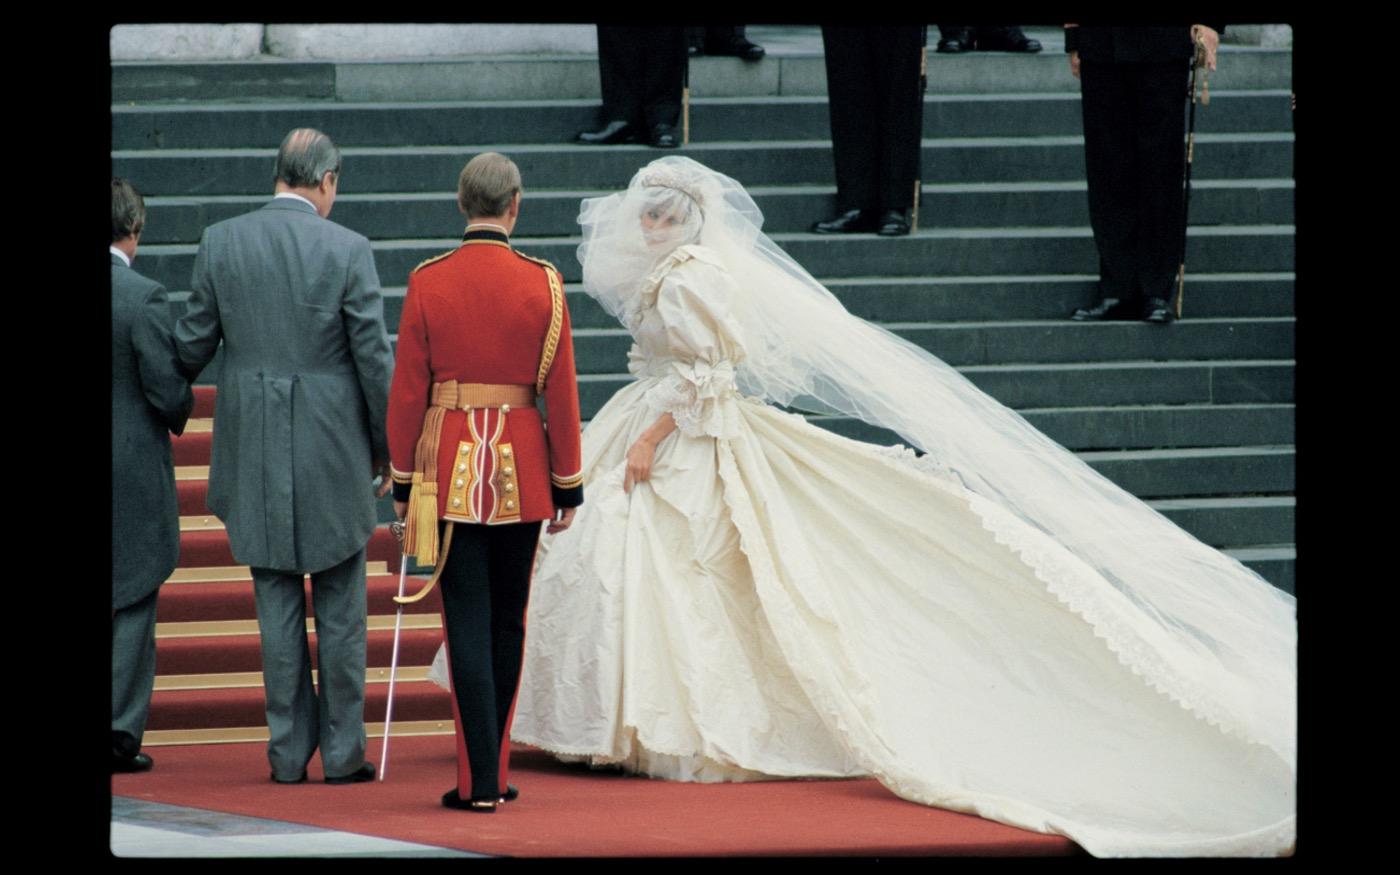 In her last moments as an unmarried girl, Diana Spencer climbs the steps of St Pauls to her wedding with Prince Charles  1981 : Looking Back: 60 Years of Photographs : David Burnett | Photographer